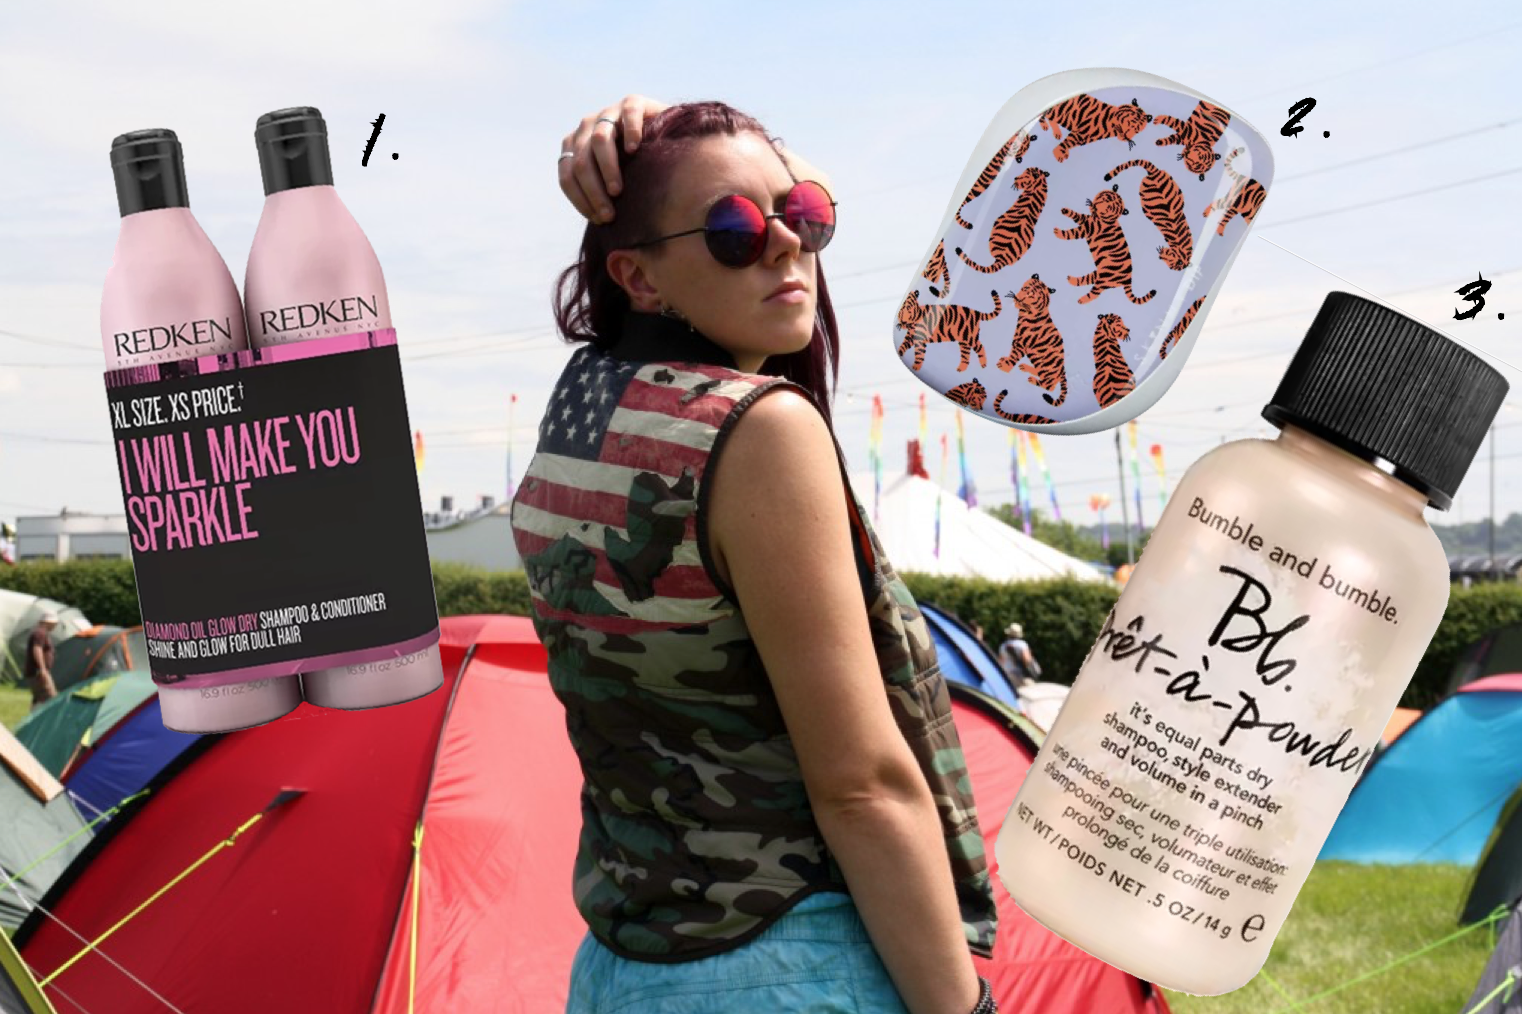 Key beauty treats for your festival plans from Cosmetify